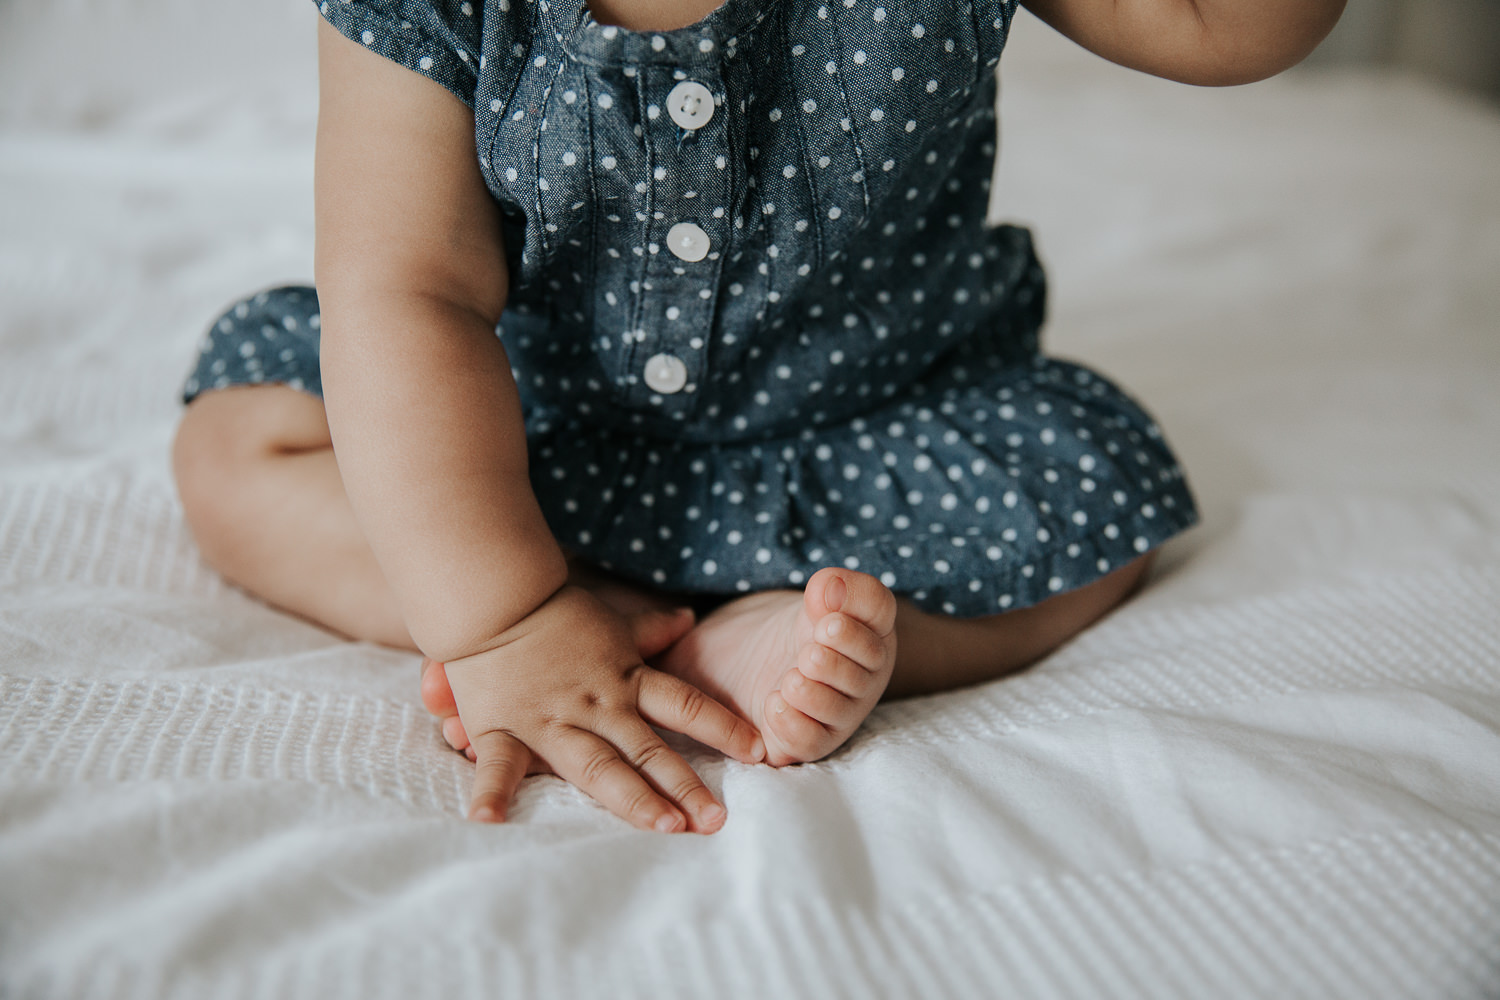 6 month old baby girl in blue and white polka dot dress sitting on bed, close up of hand and feet - Newmarket Lifestyle Photos